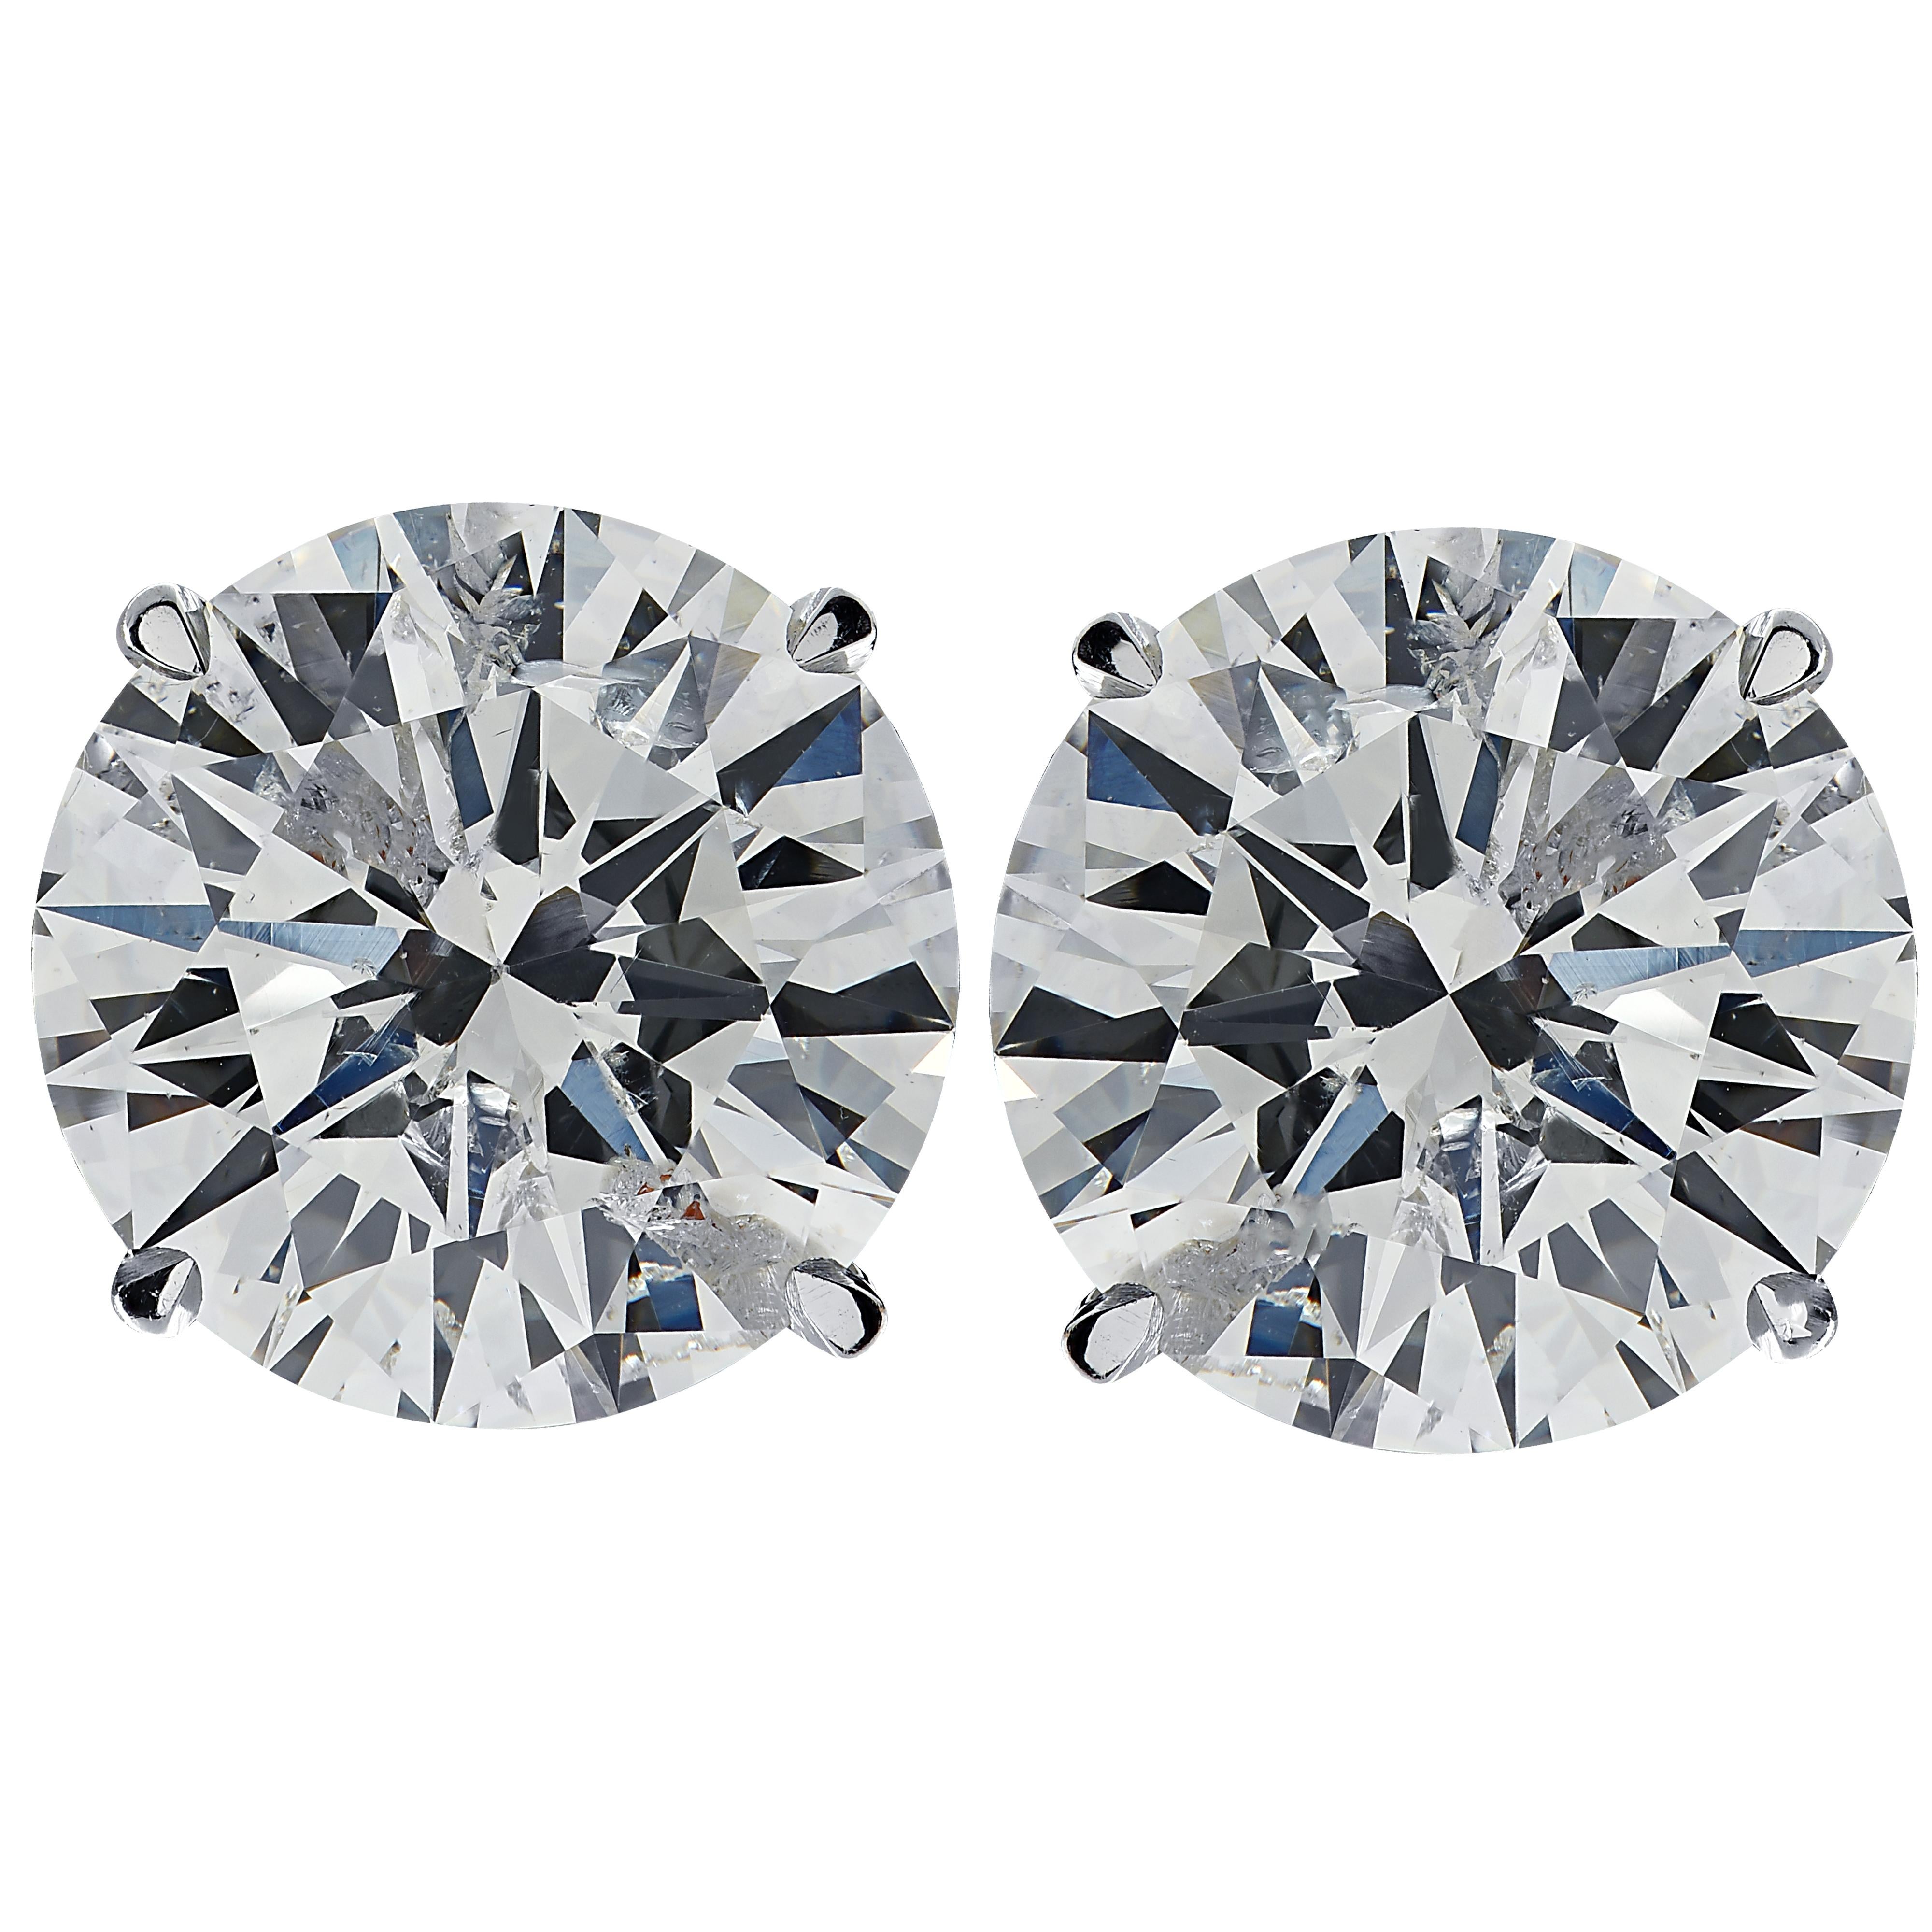 Stunning Vivid Diamonds solitaire stud earrings crafted in white gold, showcasing 2 spectacular round brilliant cut diamonds weighing 4.04 carats total, J color I1 clarity. These diamonds were carefully selected and perfectly matched to create these